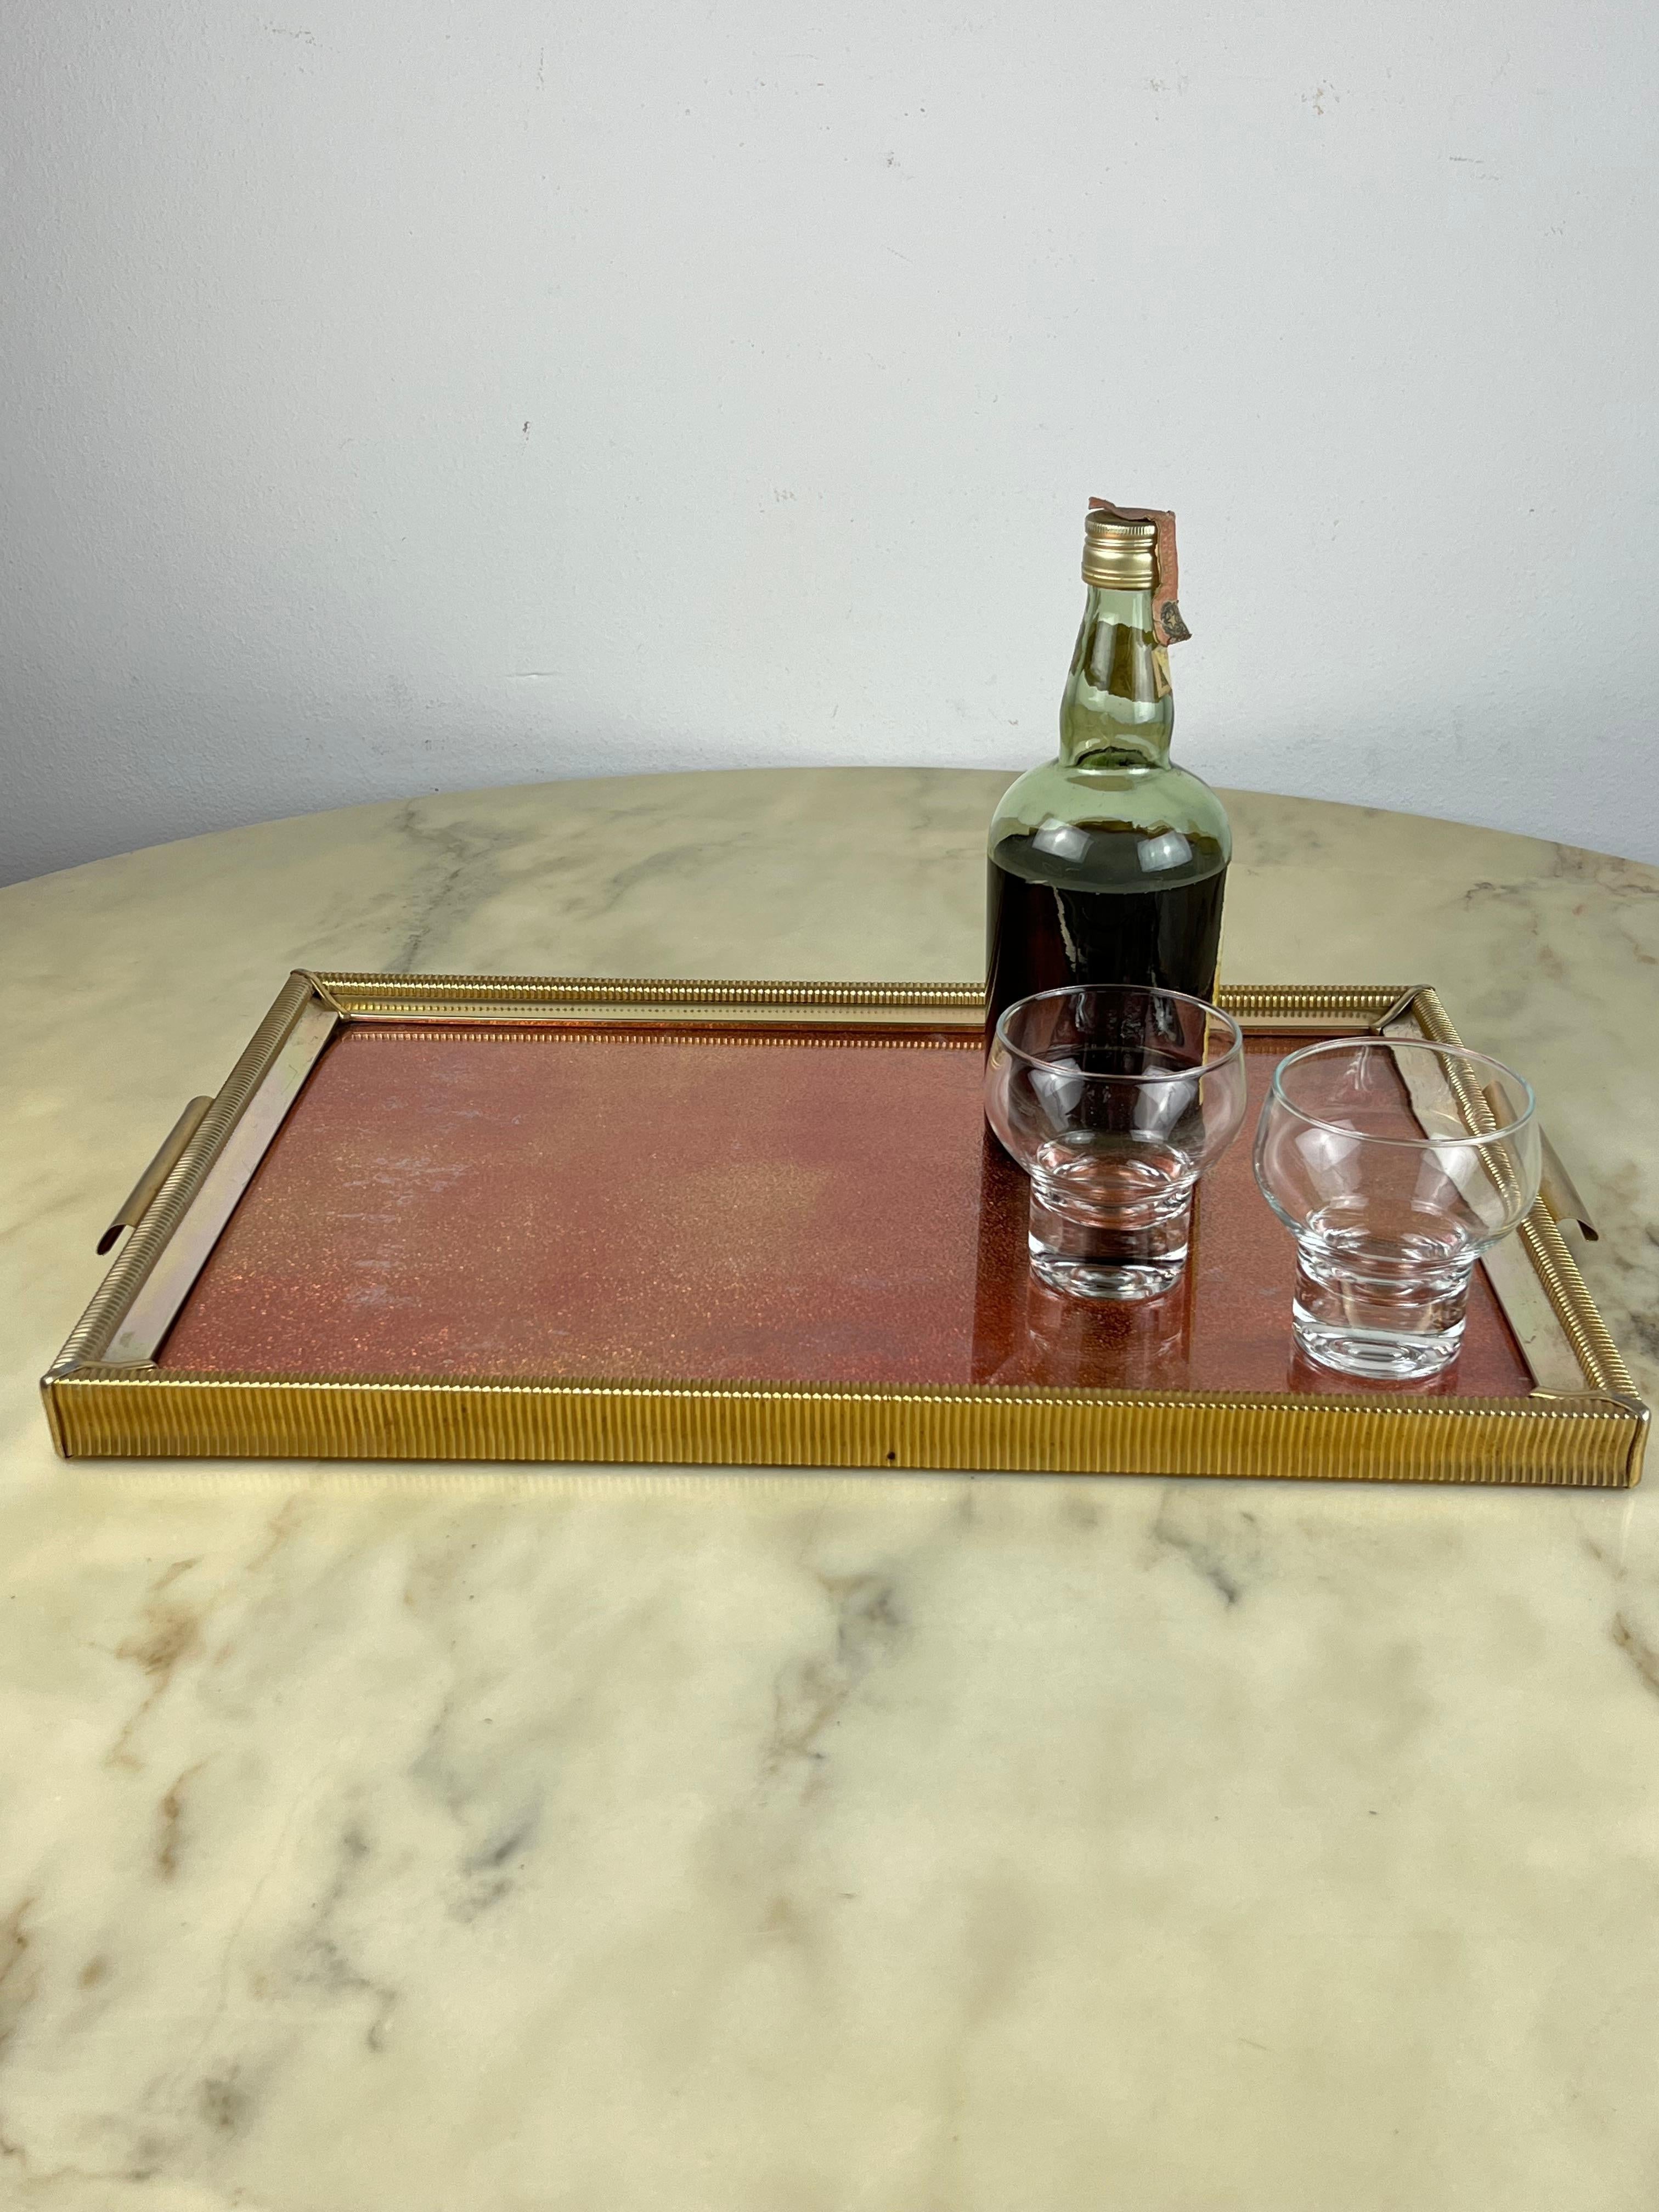 Large handcrafted tray, Italy, 1950s
Coated in golden metal, it has a red top with glass.
Intact and in good condition.